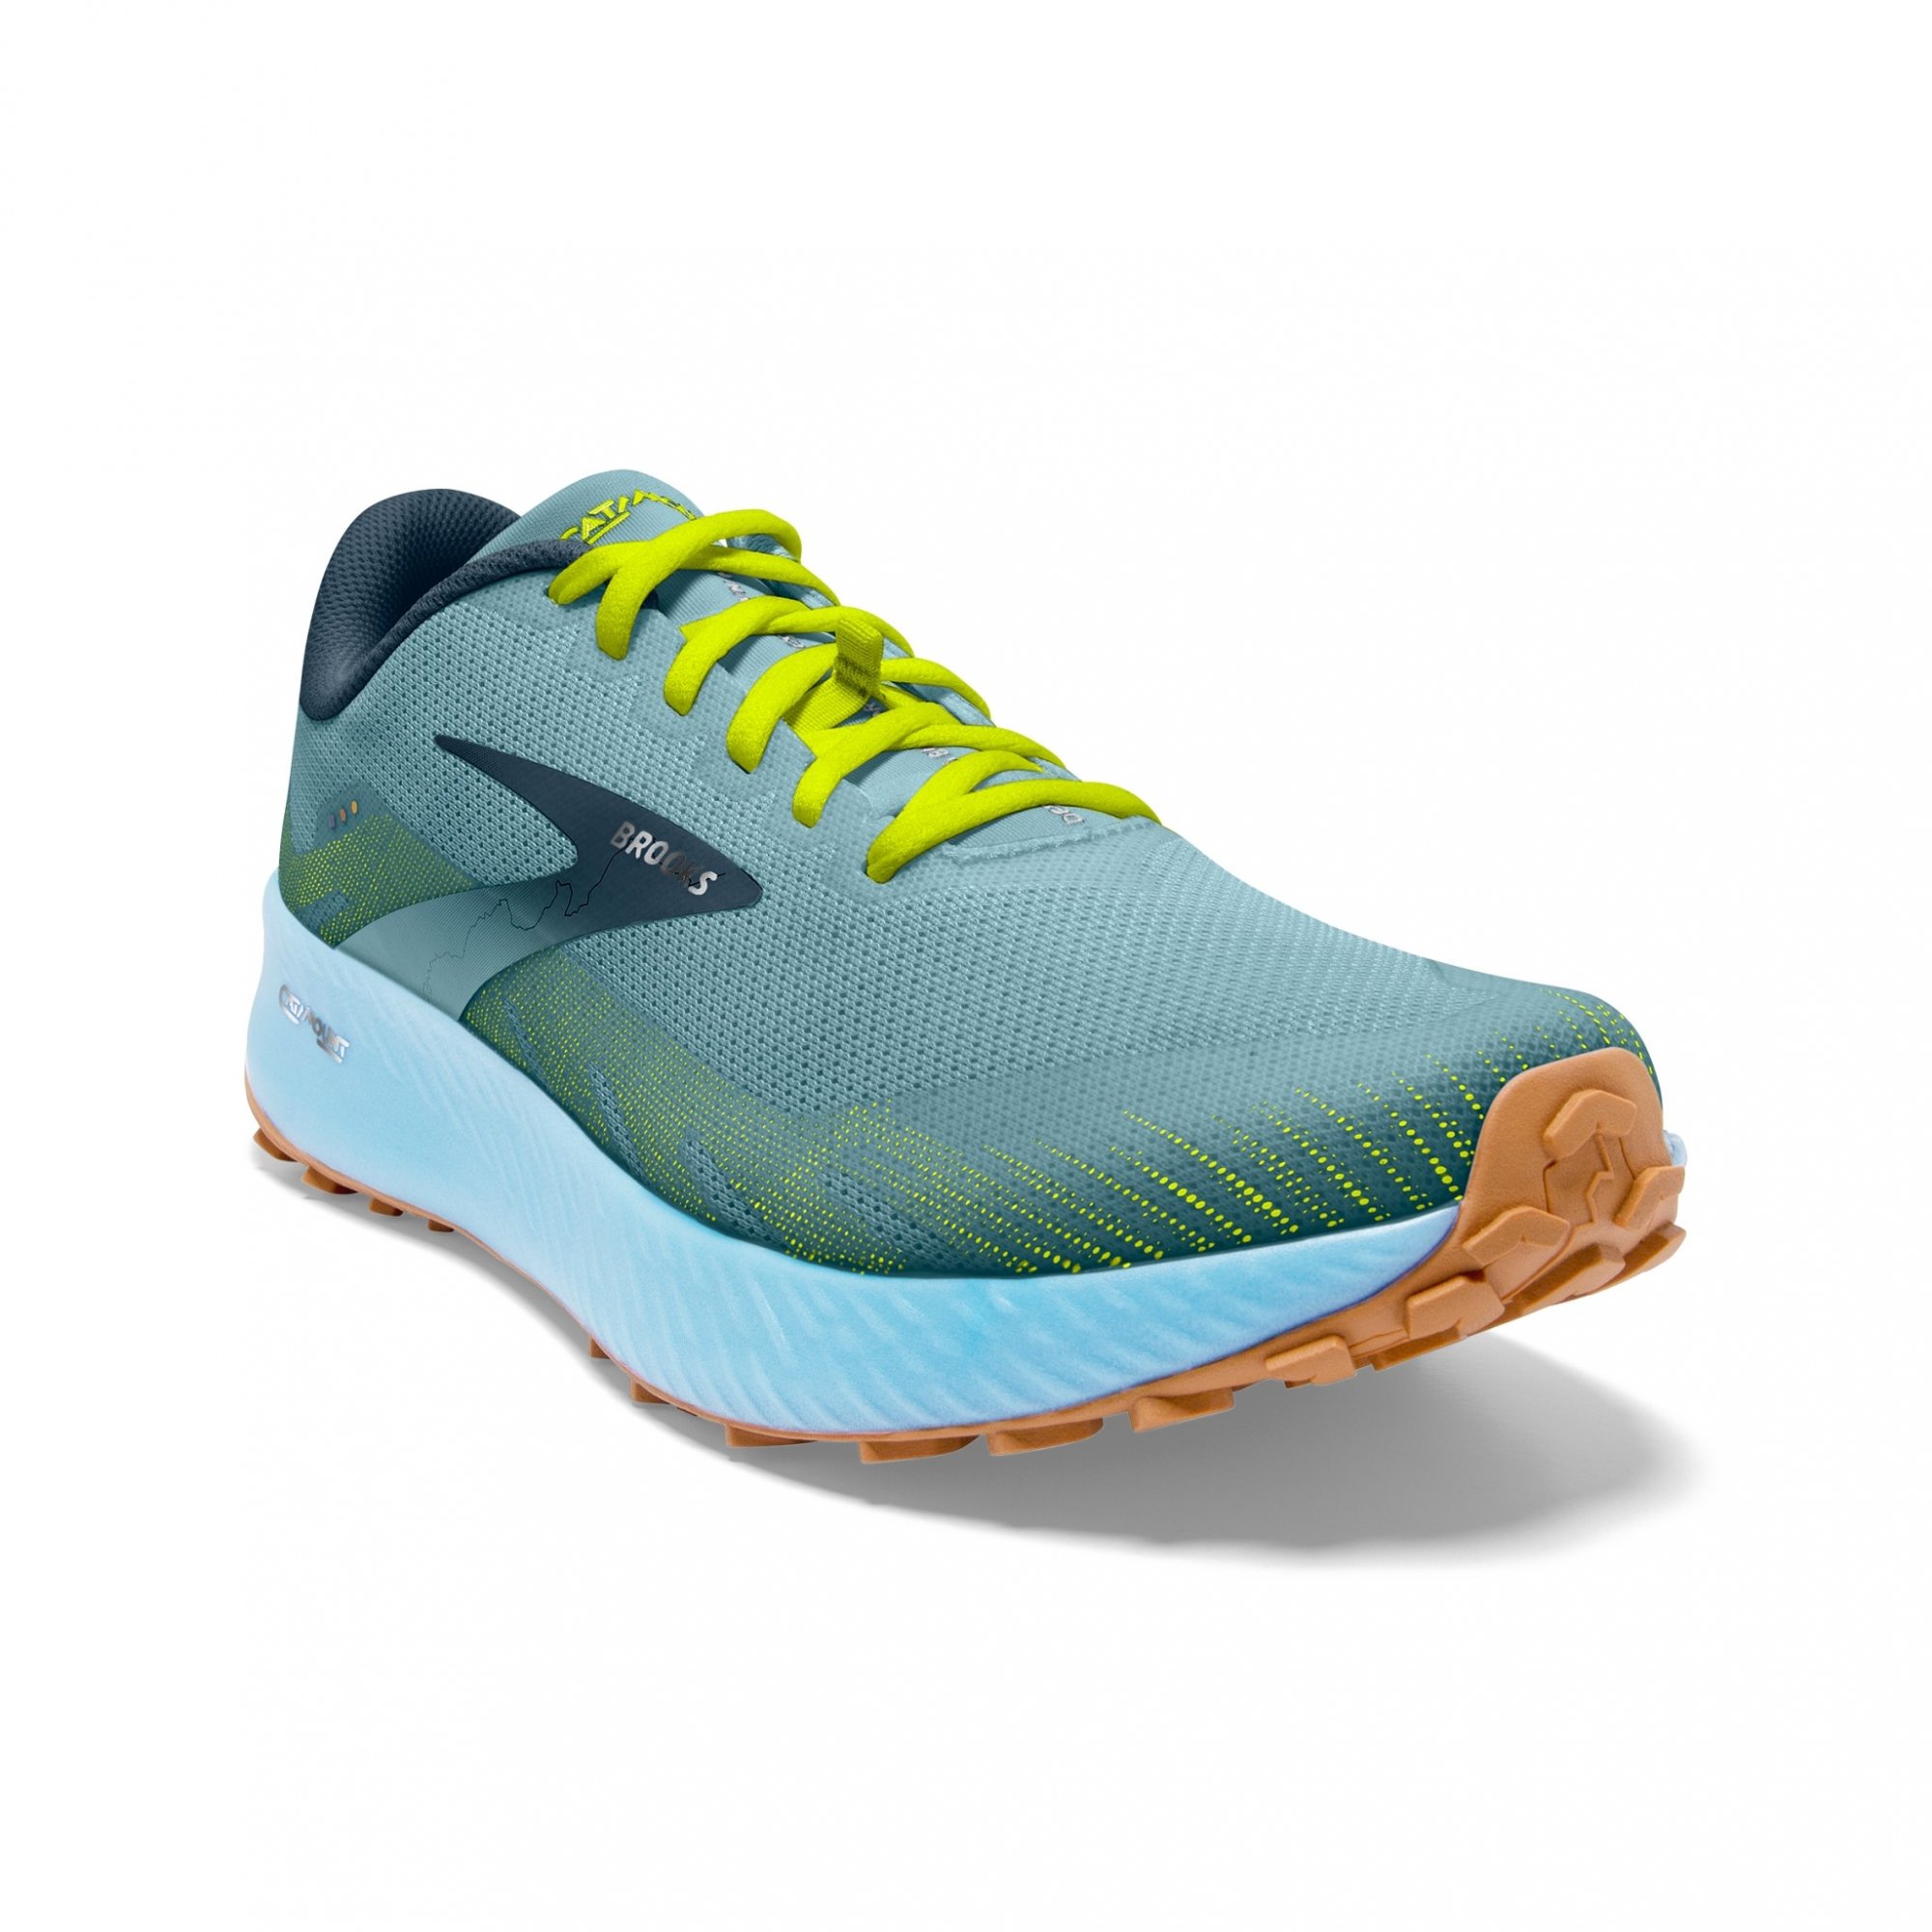 BROOKS Catamount Blue/Lime/Biscuit